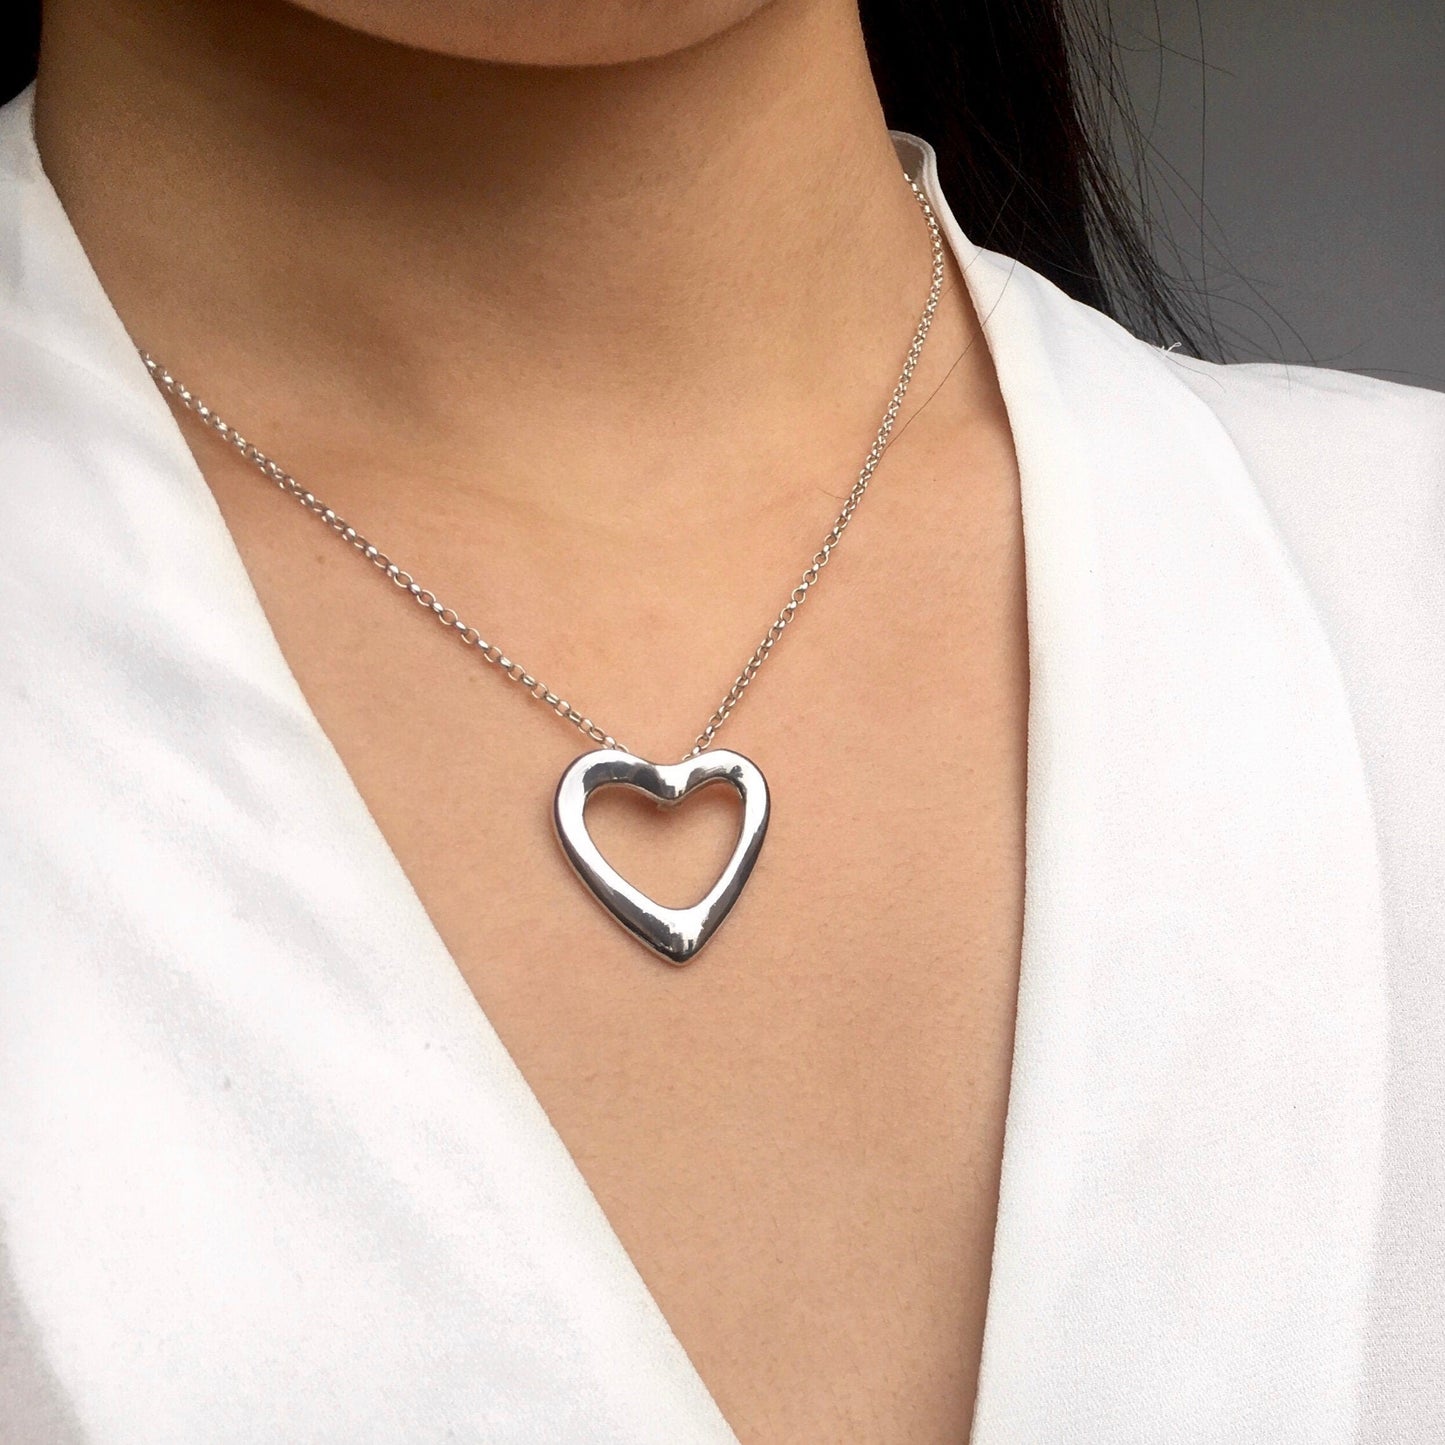 Personalized Heart Pendant or Necklace, Silver Open Heart Pendant for Chain, Mothers Day Gift Idea, Silver Pendant Necklace  Girlfriend